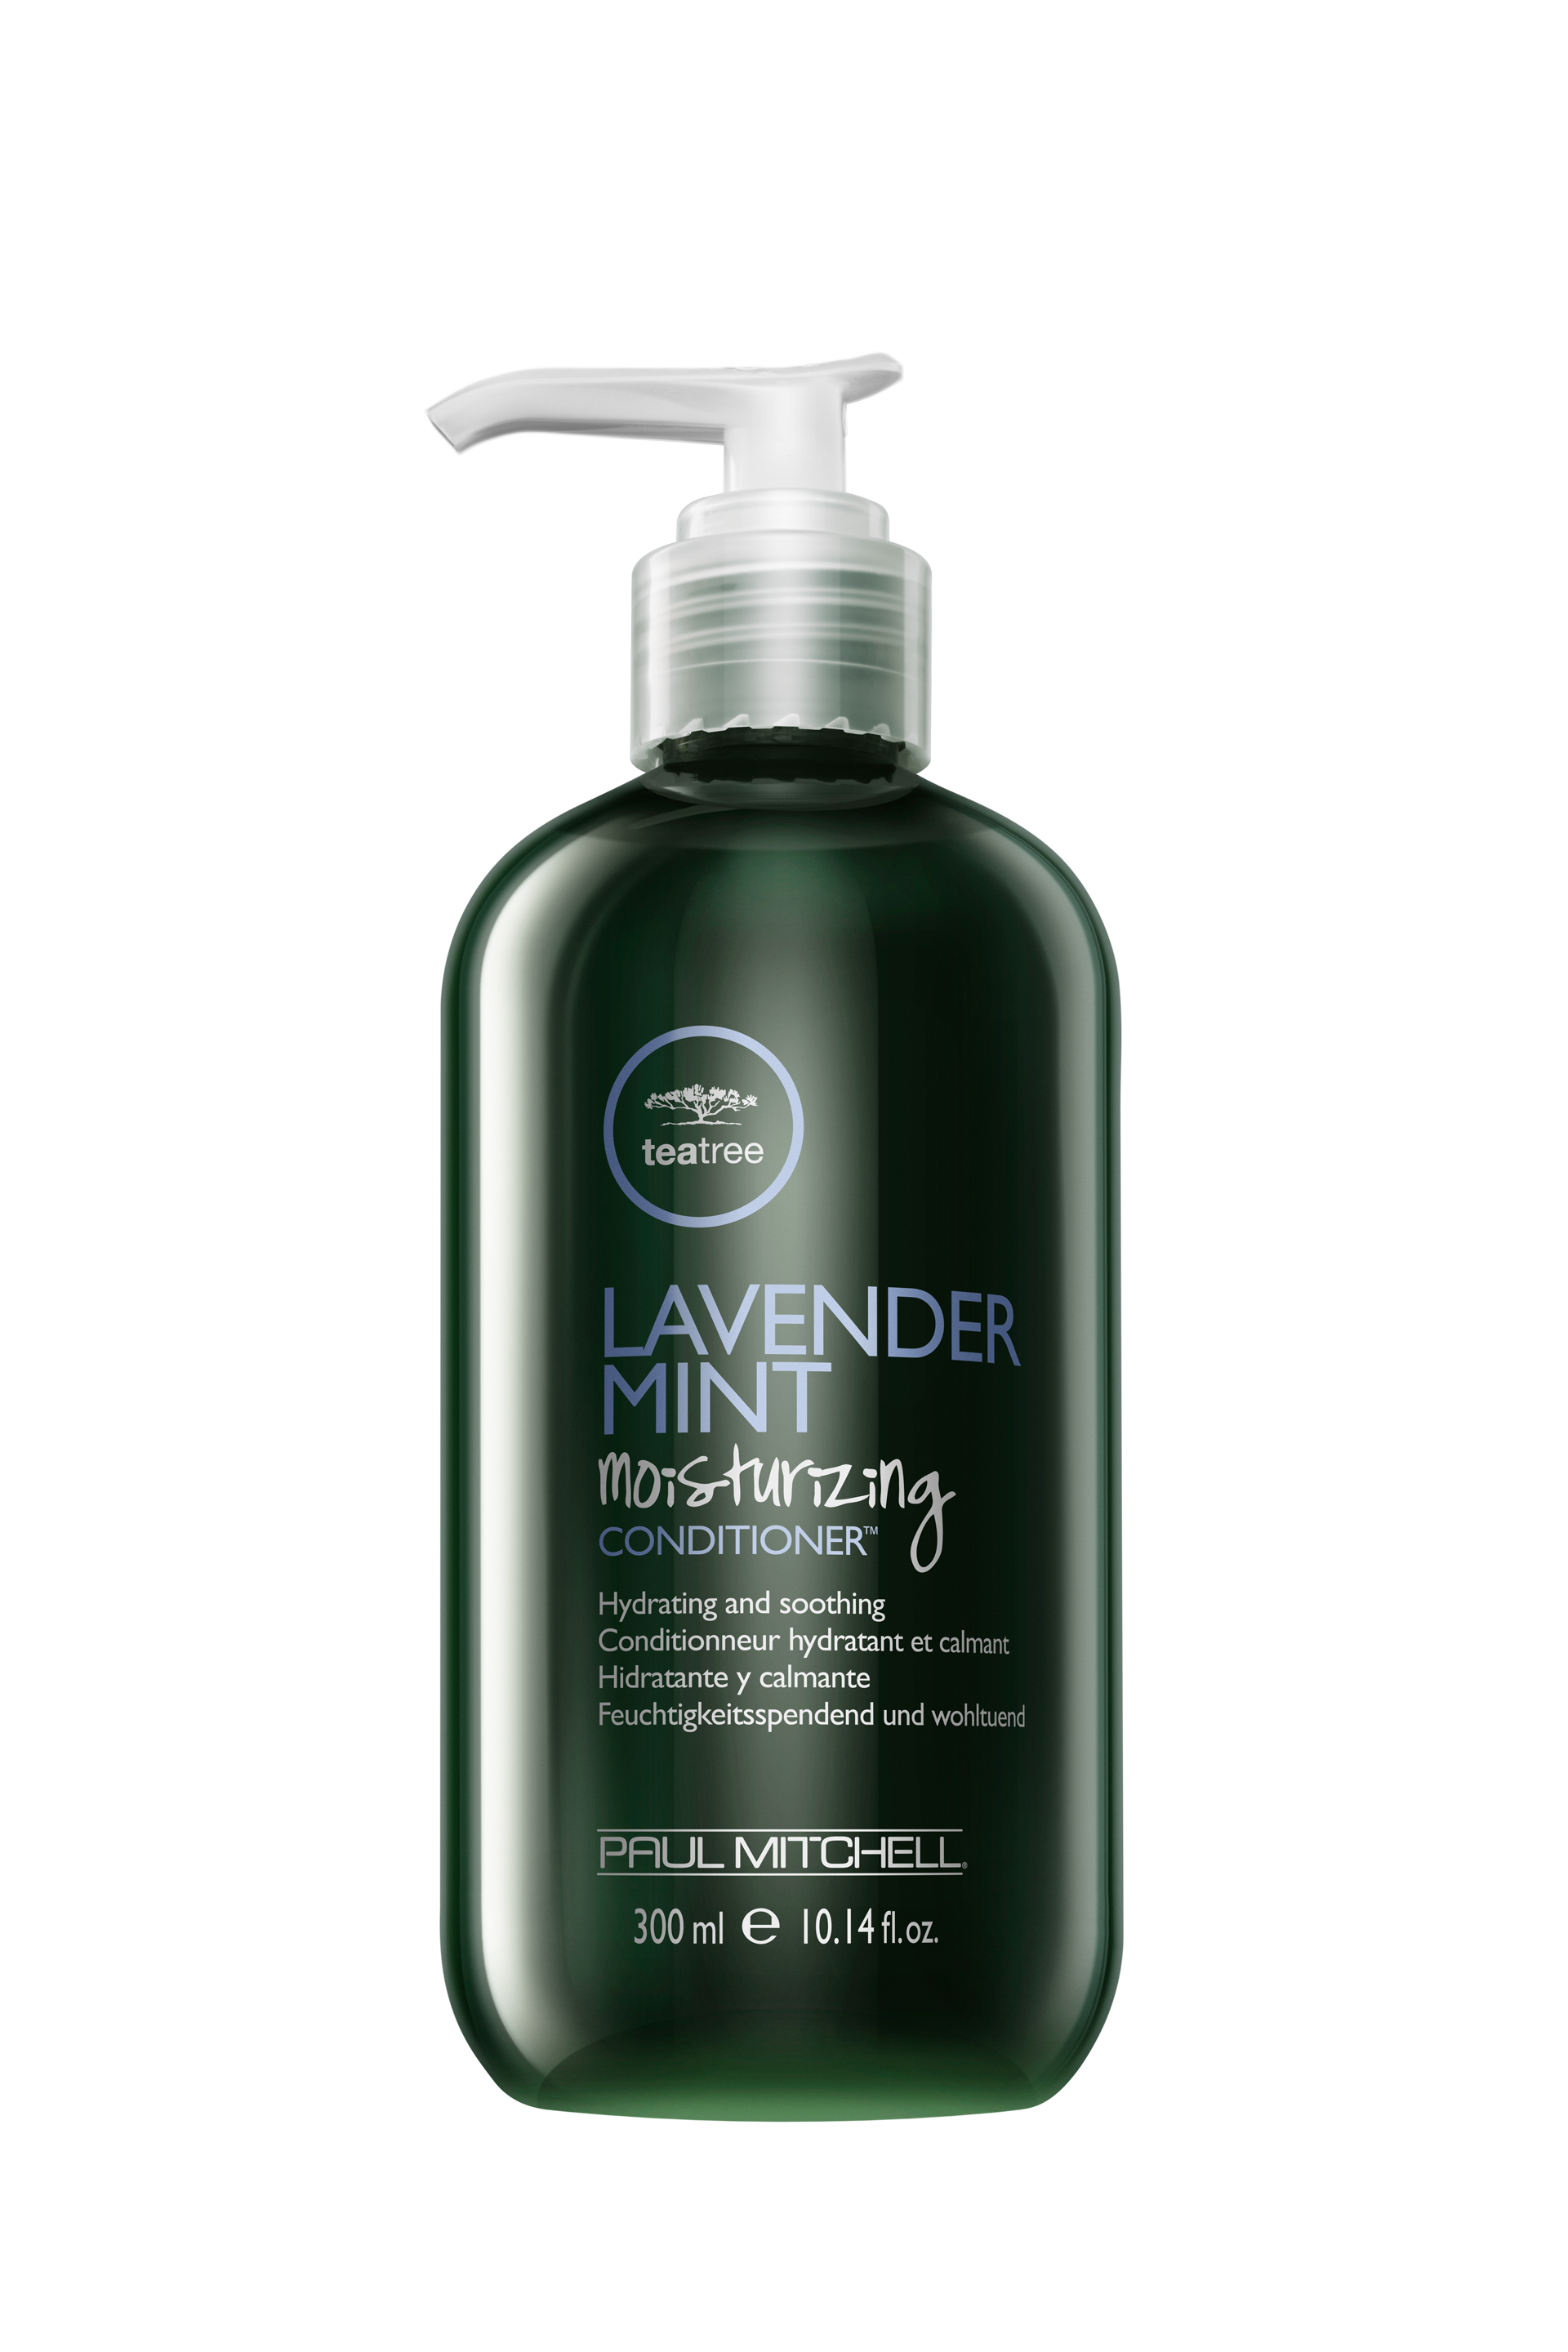 Tea Tree Lavender Mint Hair Conditioner Paul Mitchell - 300ml |  New Old Man